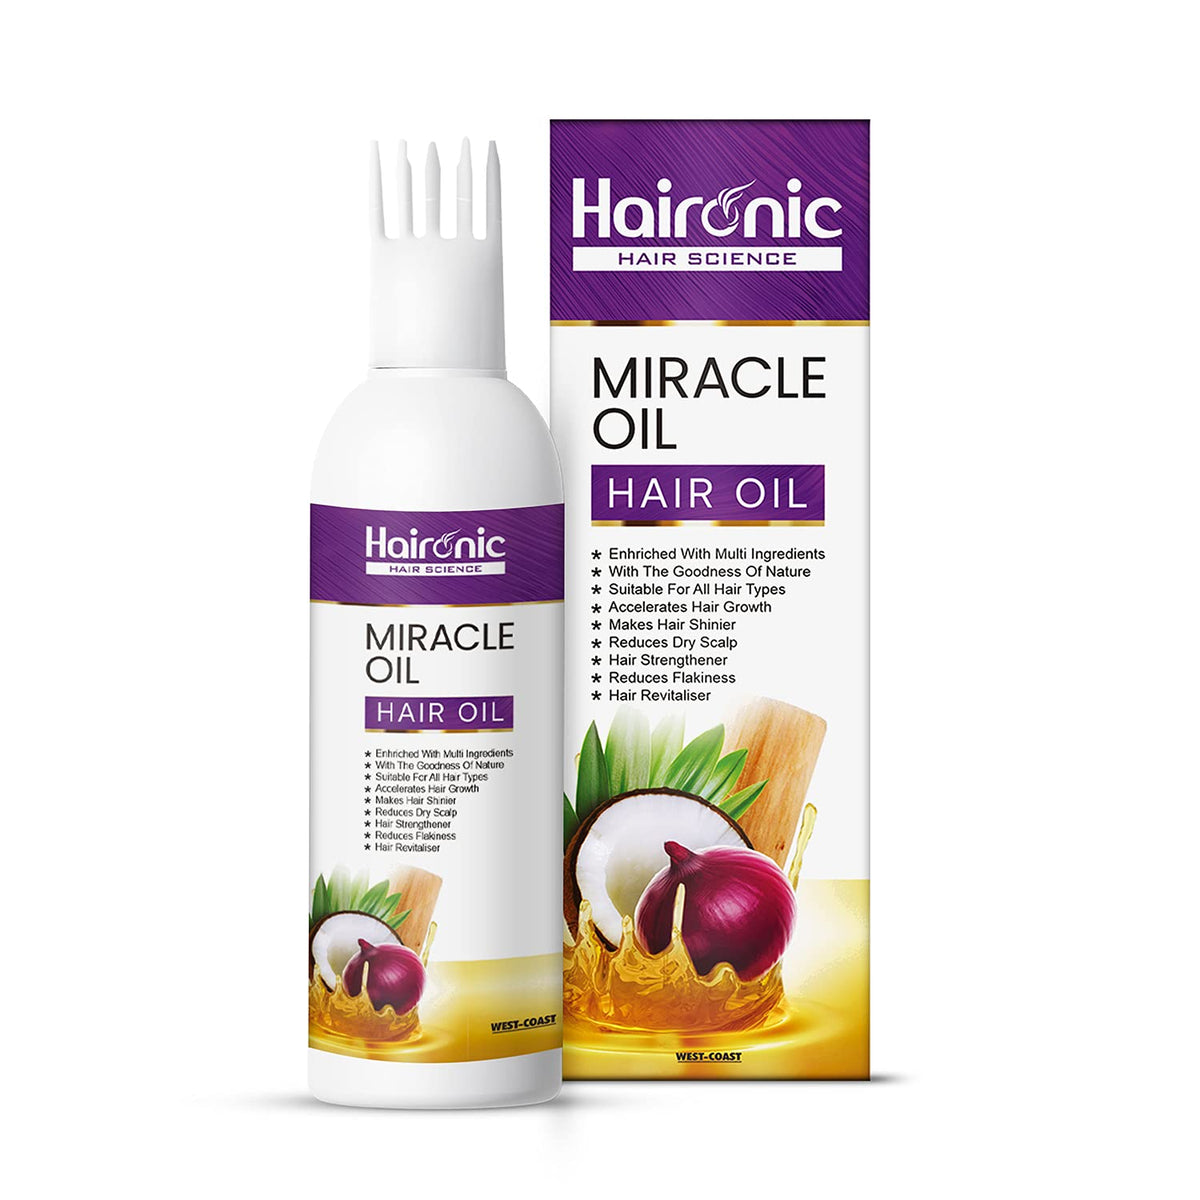 Haironic Hair Science Miracle Hair Oil Enriched With Multi Ingredients for Anti-Hair Fall Control with Organic Onion and Sesame Seeds Oil -100ml (Pack of 10)